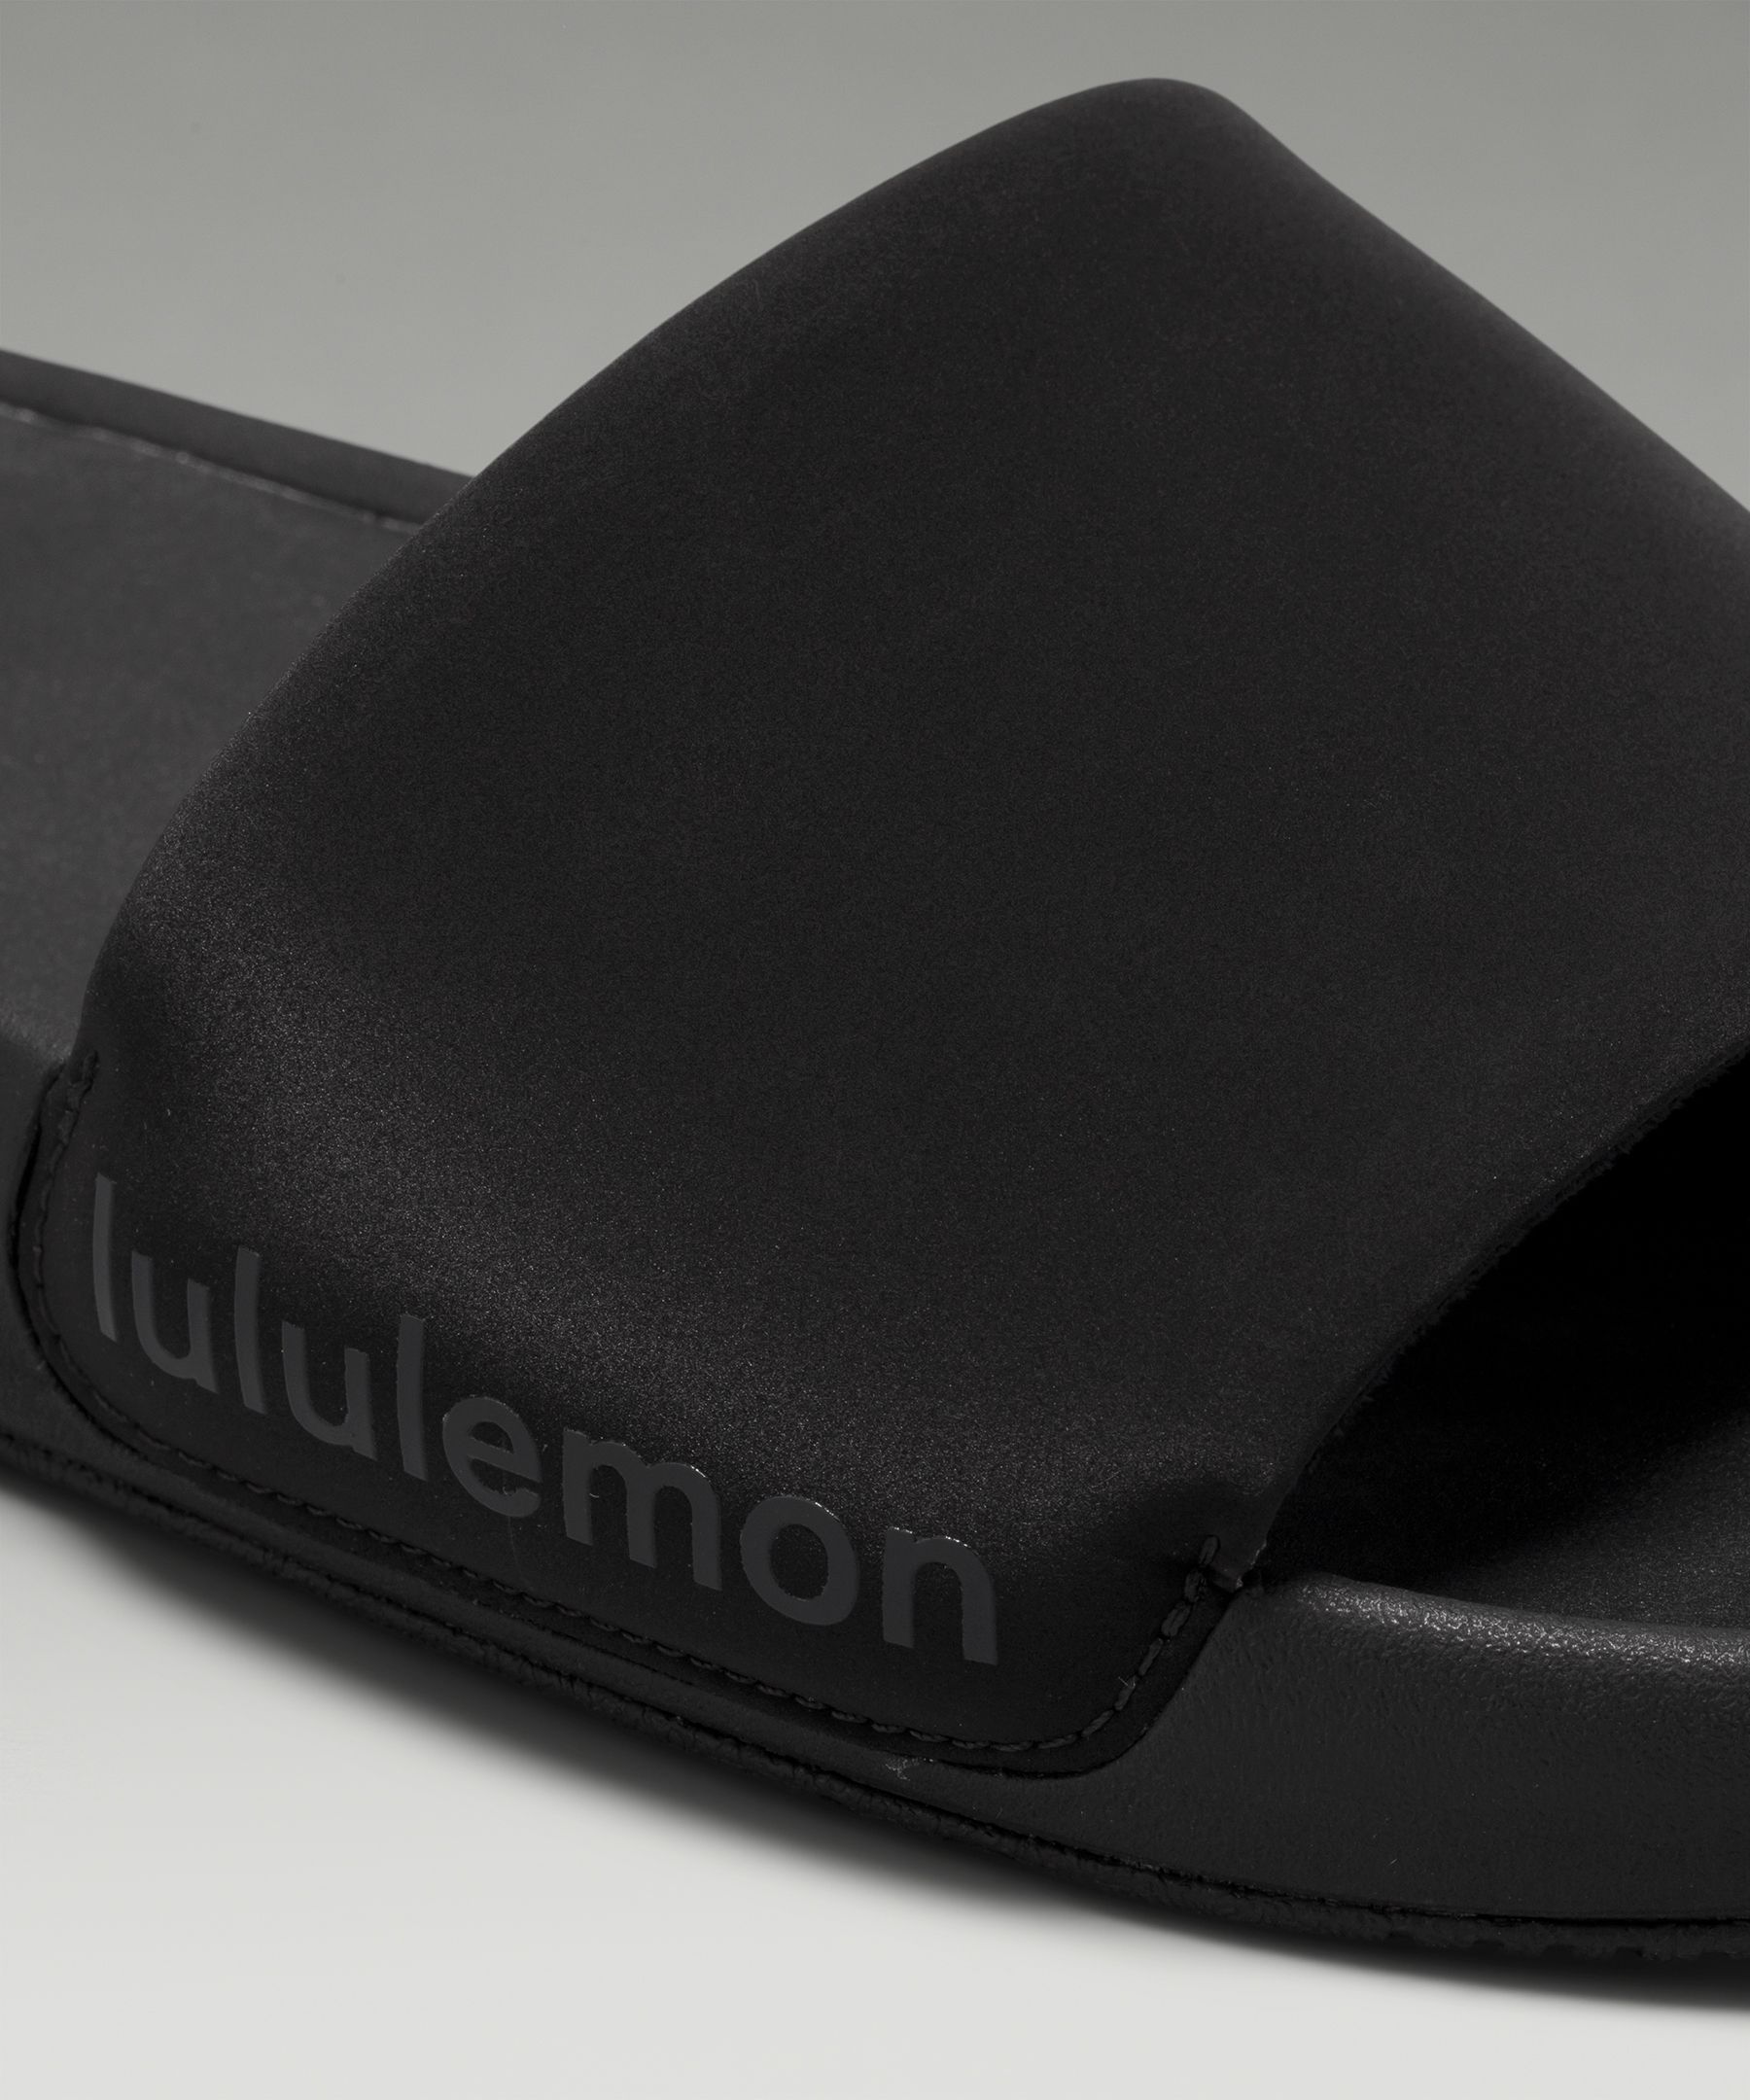 Where to buy new lululemon Cityverse sneakers and Restfeel slides